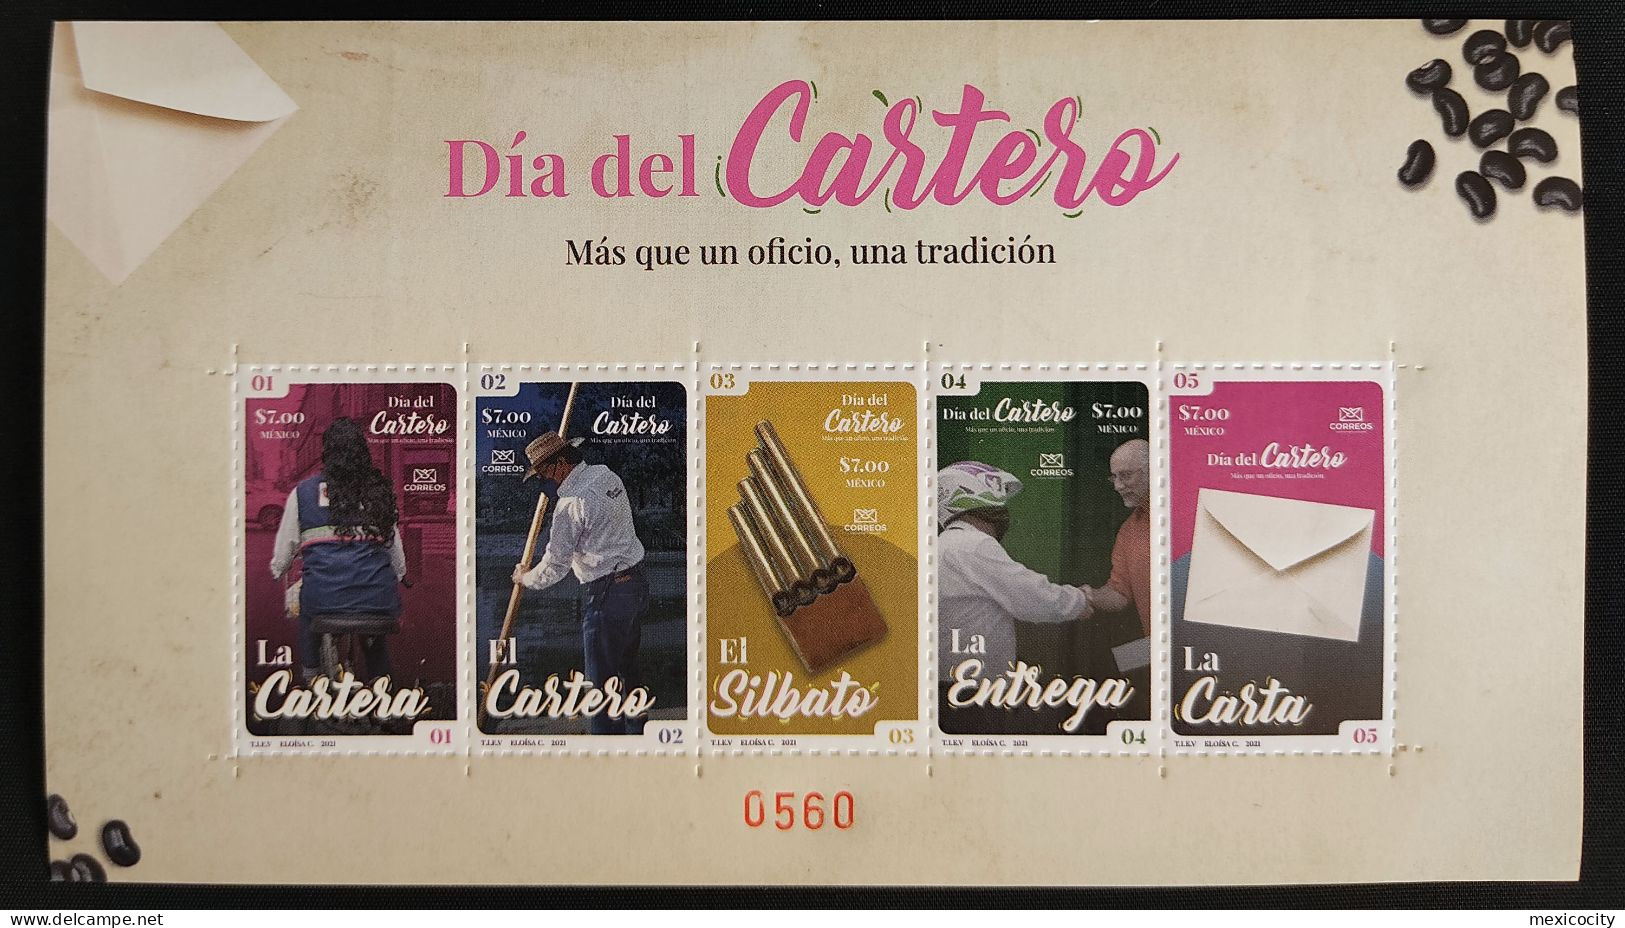 MEXICO 2021 CARTER DAY - Carter W/ Covid Mask 5 Stamp Self Adh. BLOC COLLECTOR Mint + See Img. - México